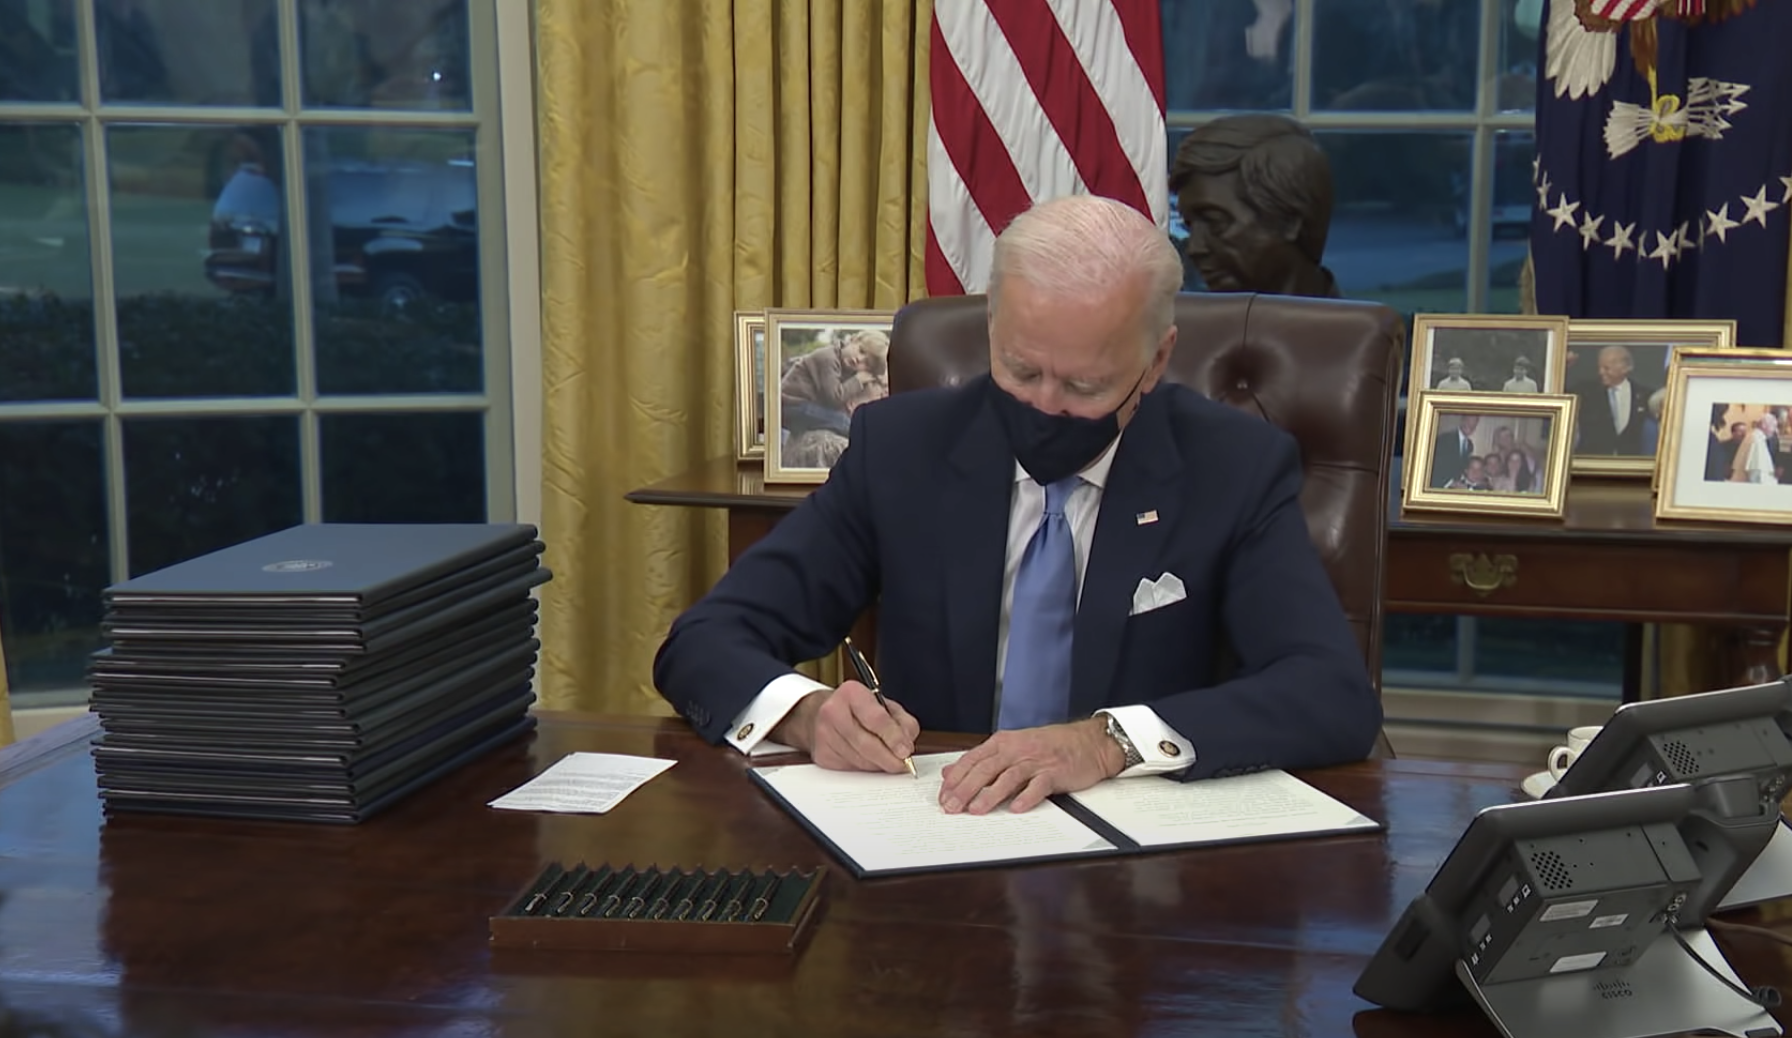 Biden signs executive order designed to protect access to contraception